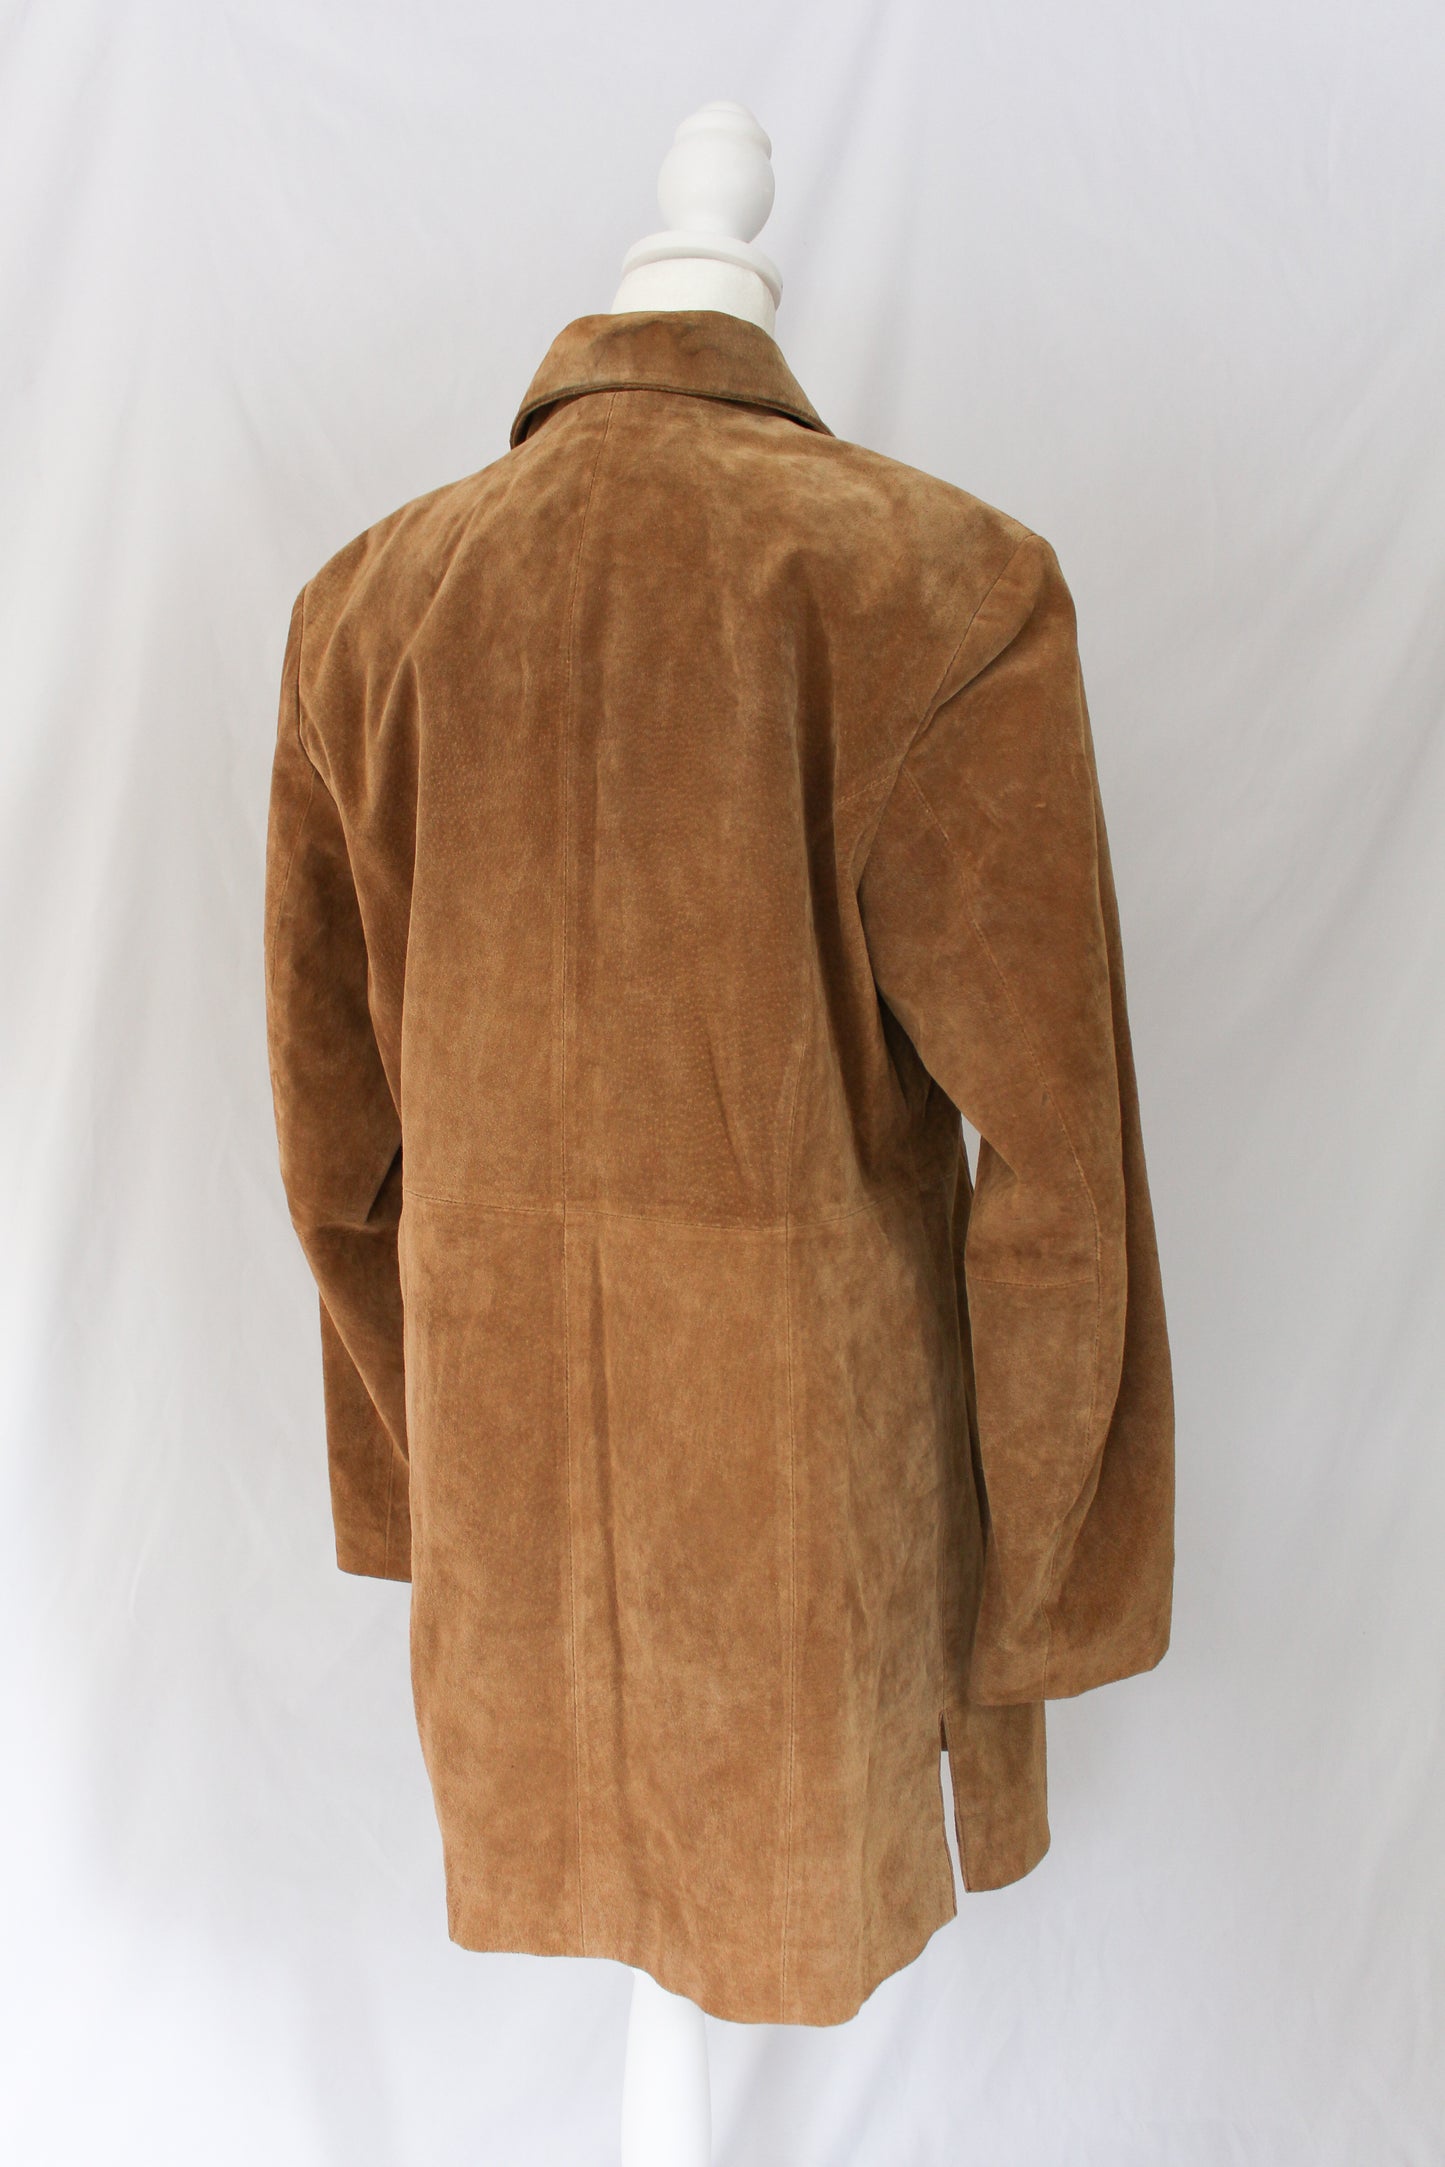 light brown suede leather jacket